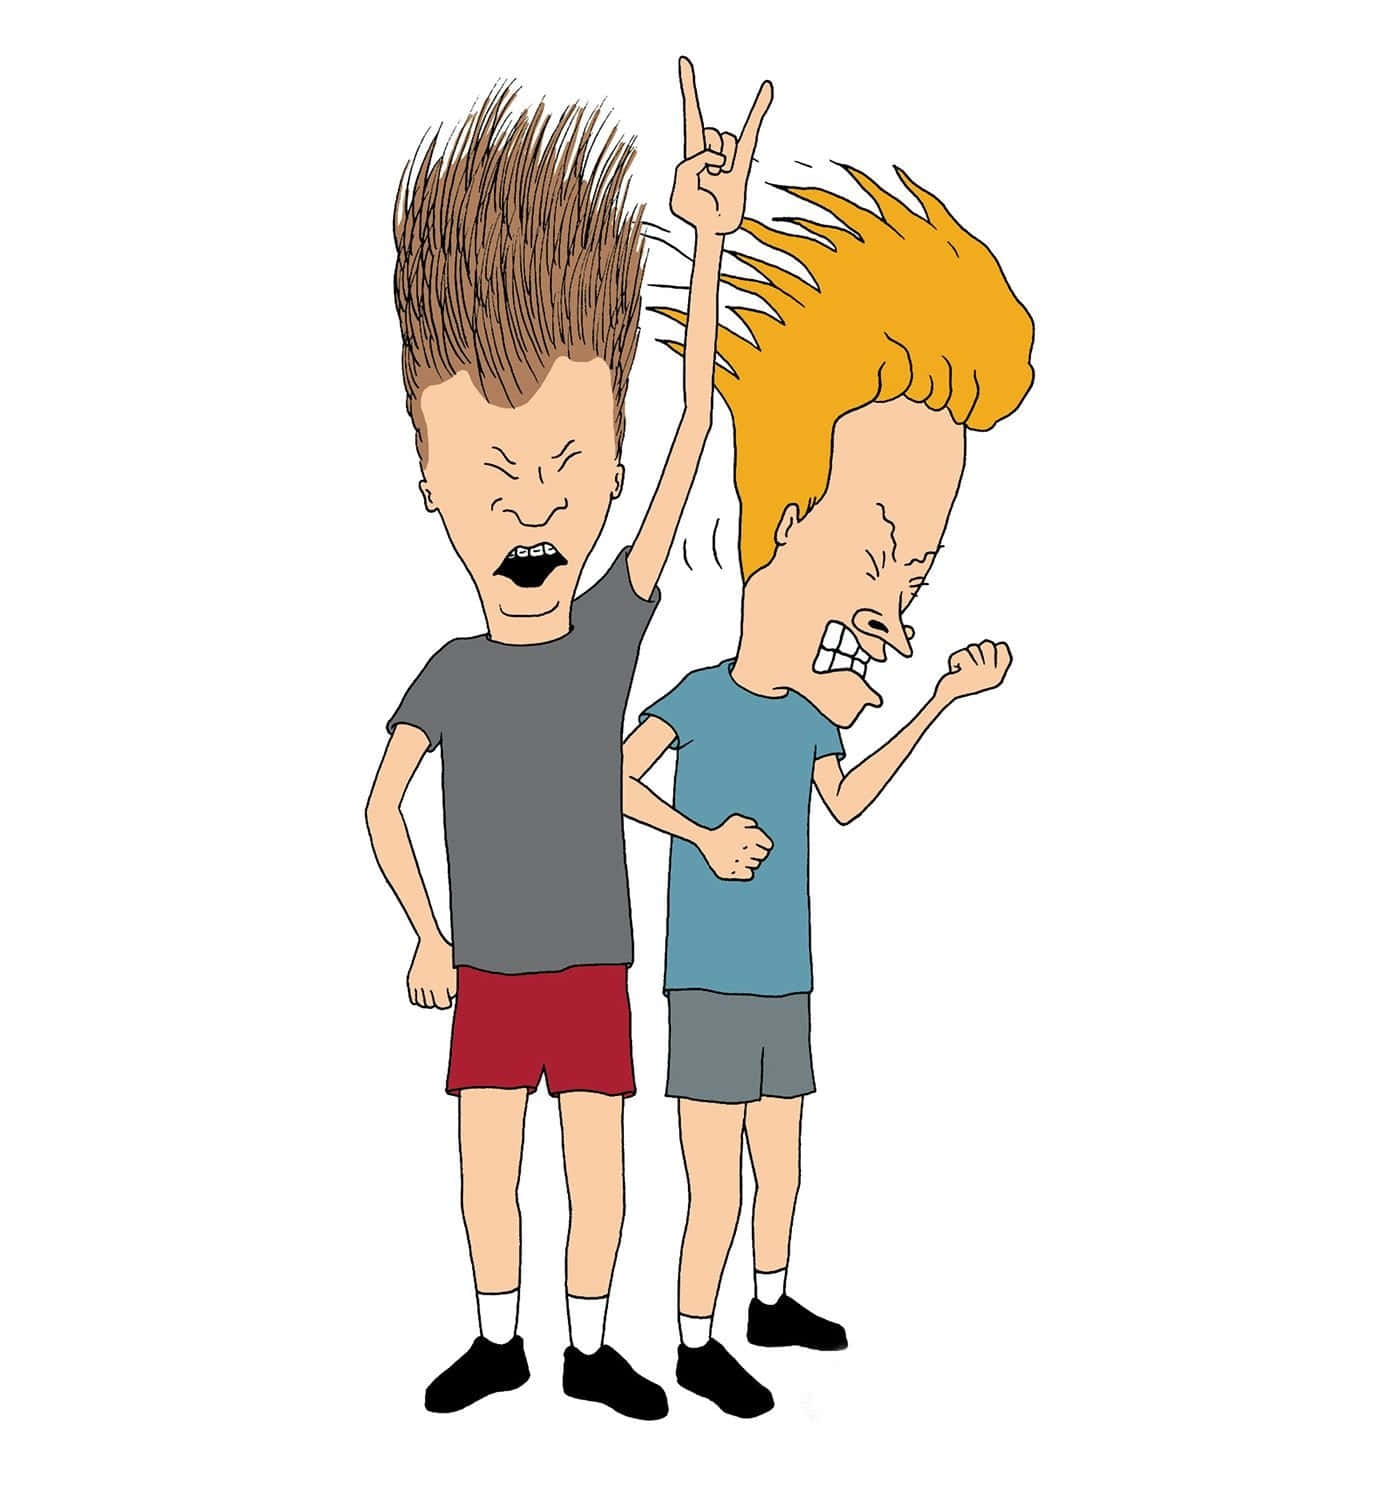 Beavisoch Butthead Letar Efter Trubbel. (this Is A Direct Translation, But 